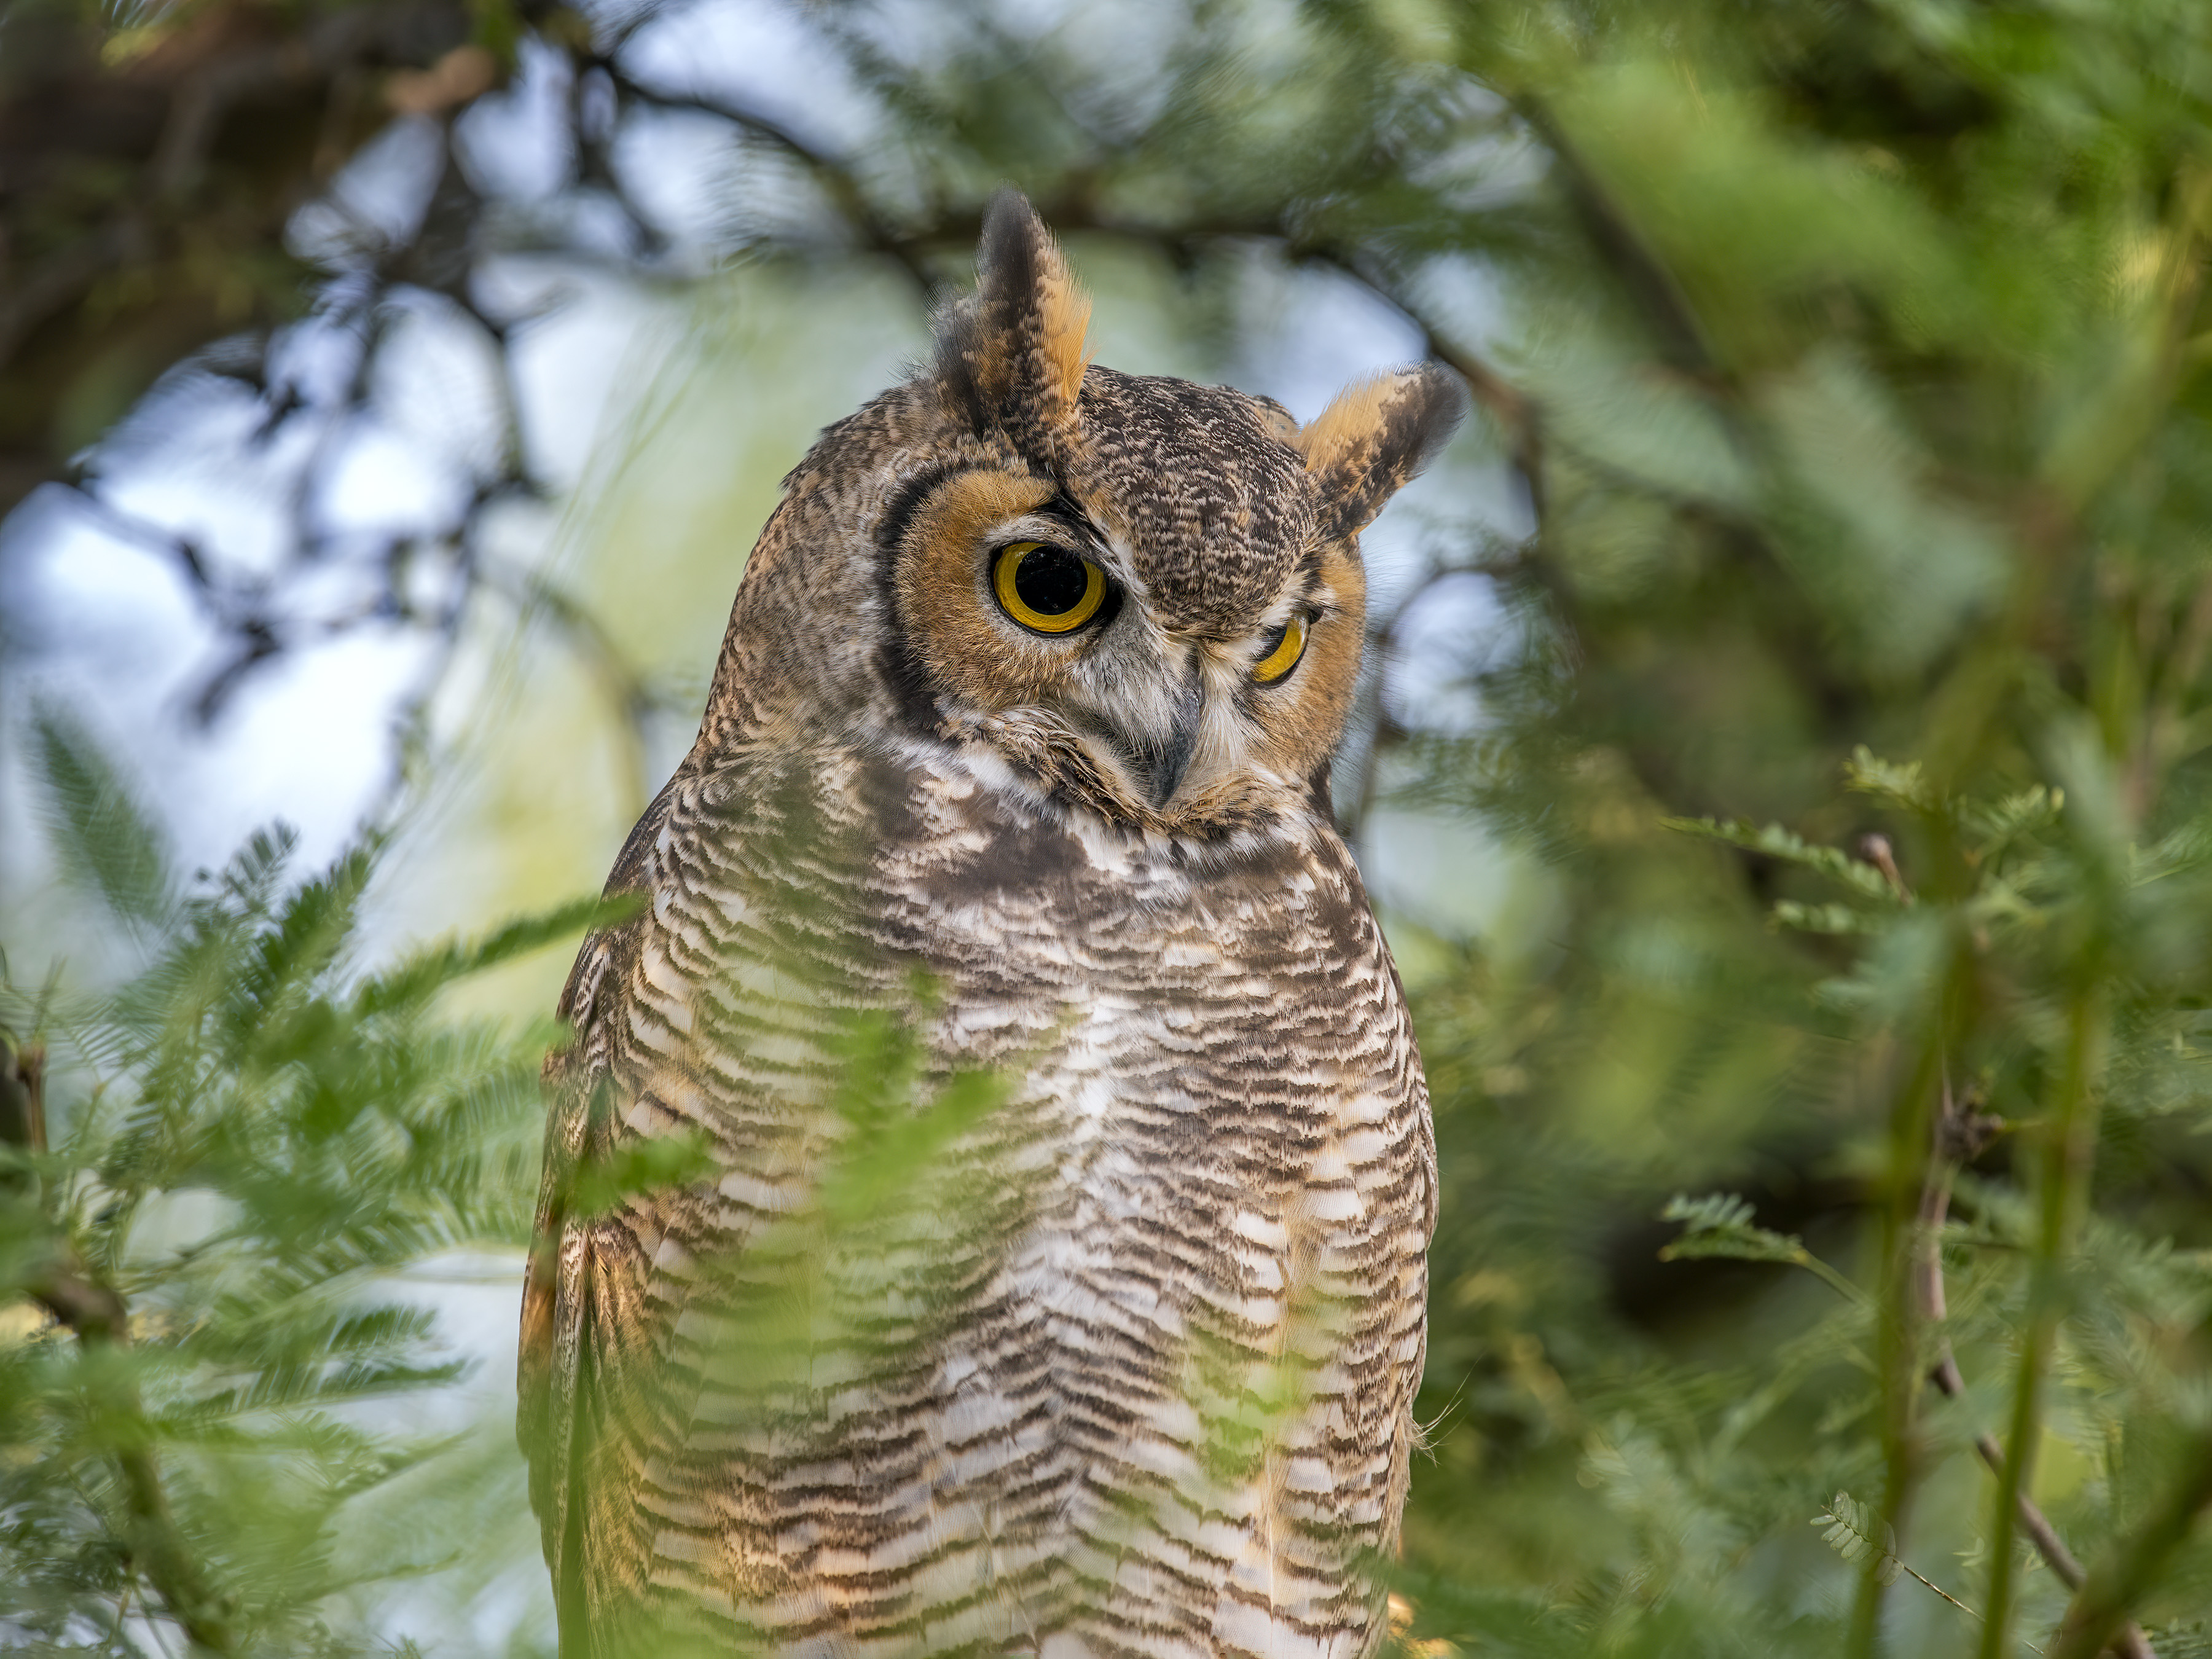 Photo by David C Ring  |  This Great Horned Owl on alert, waiting for nightfall in a native mesquite tree.